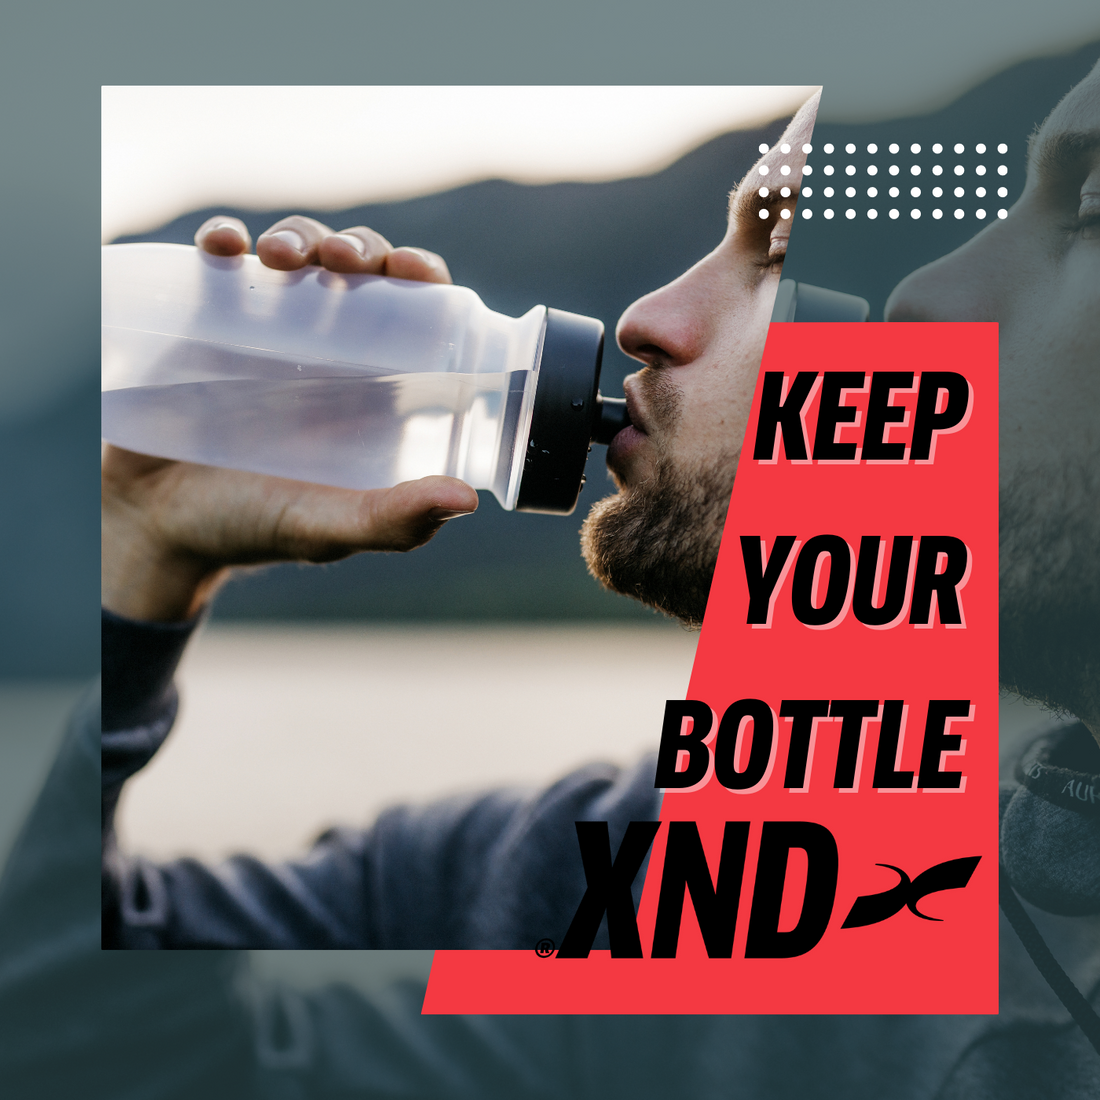 Keep your bottle